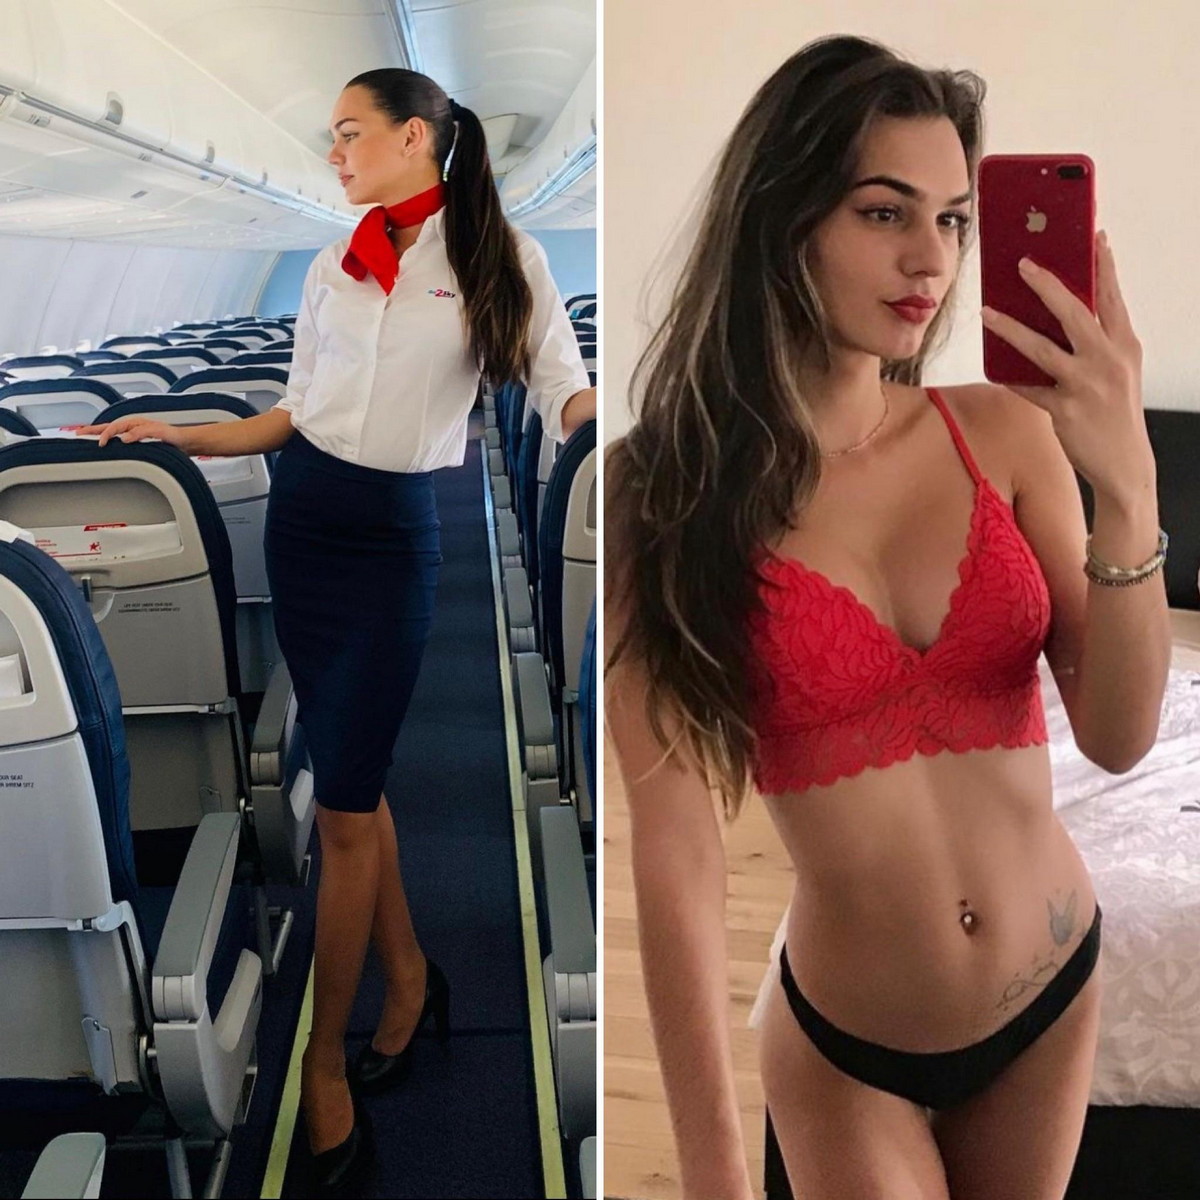 Flight Attendants With And Without Uniform (23 pics)